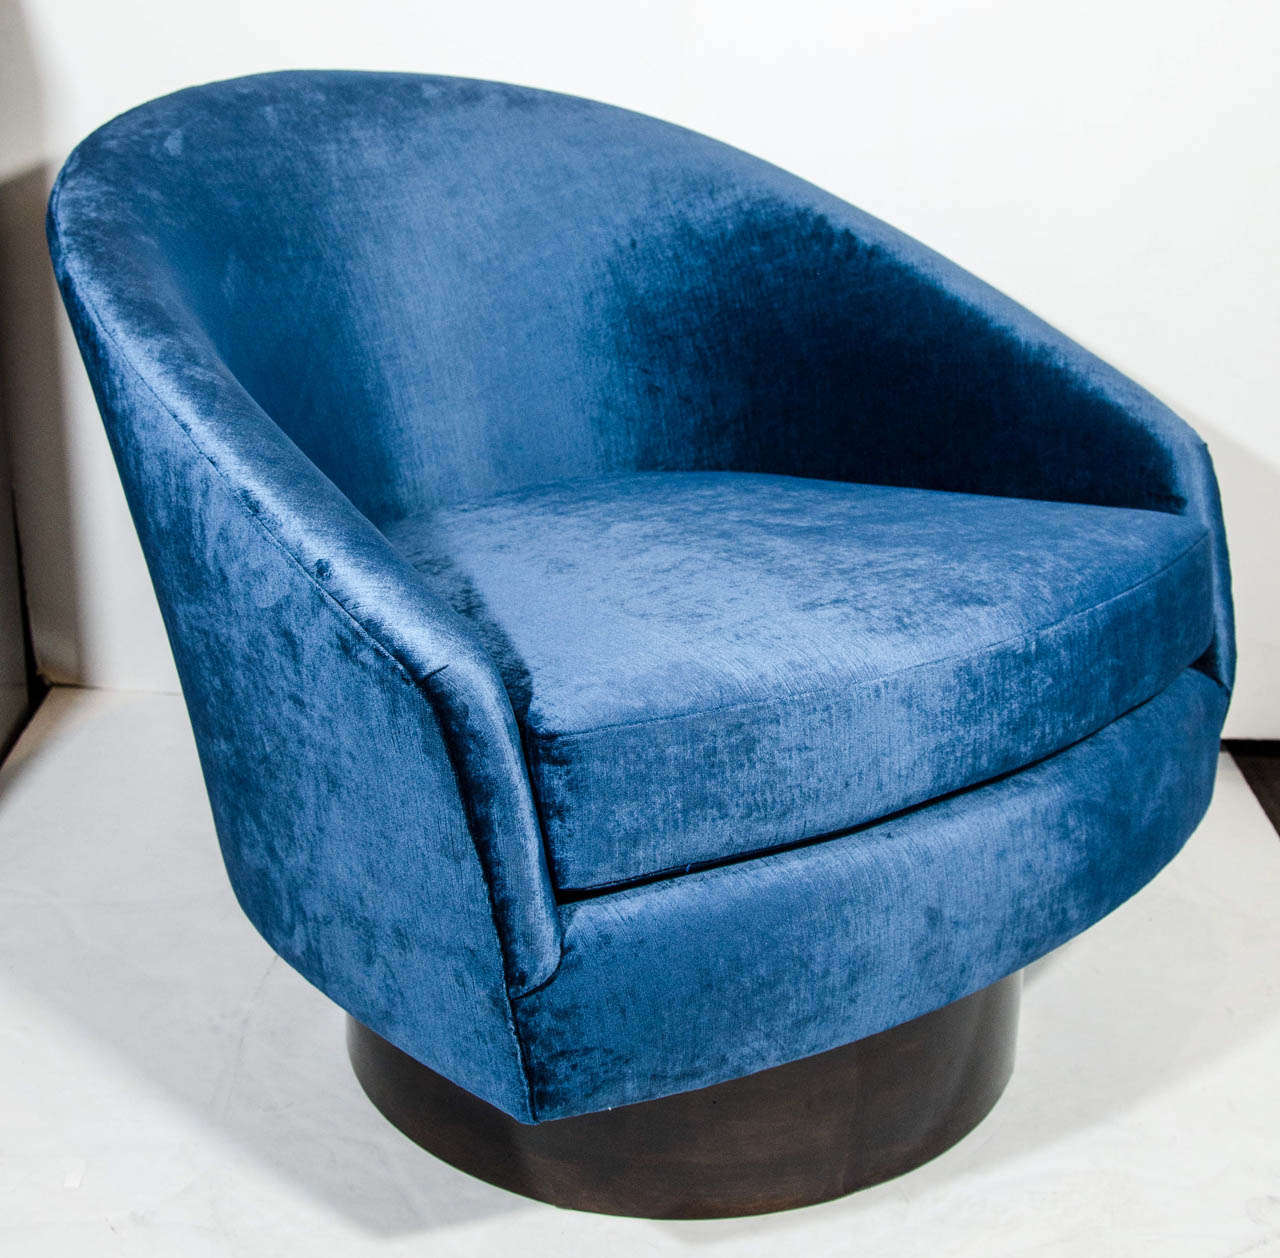 Outstanding pair of ultra modernist lounge chairs with swivel bases. The chairs have a deep barrel back design with inclined armrests. Newly upholstered in sapphire velvet by Kravet, and with circular walnut wood bases.  Beautiful from all angles.